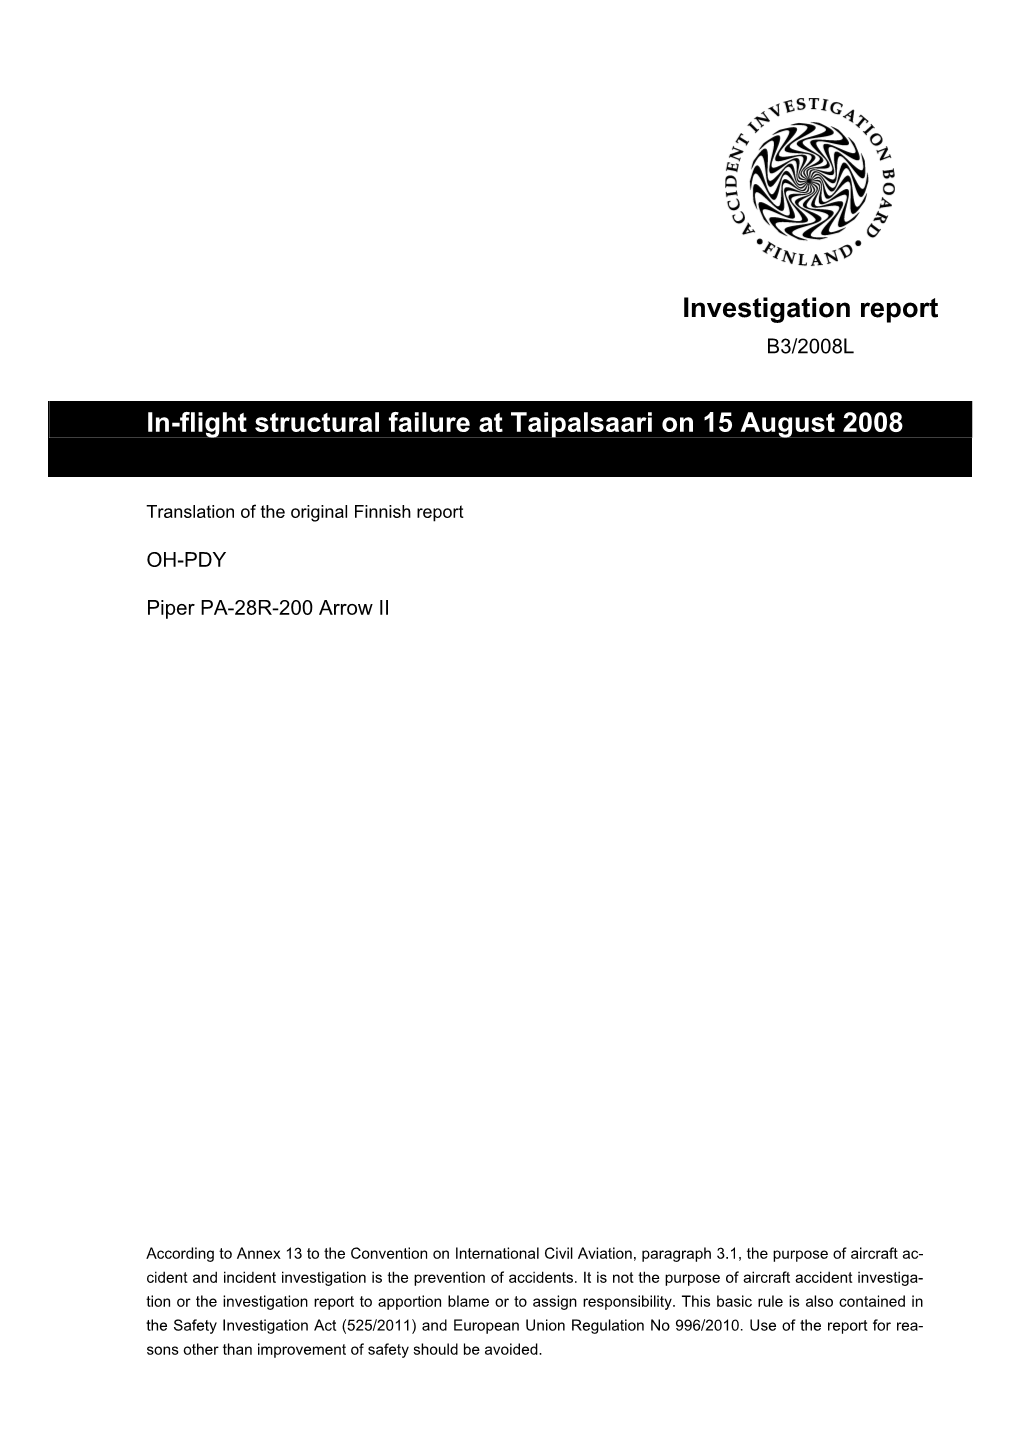 Investigation Report In-Flight Structural Failure at Taipalsaari on 15 August